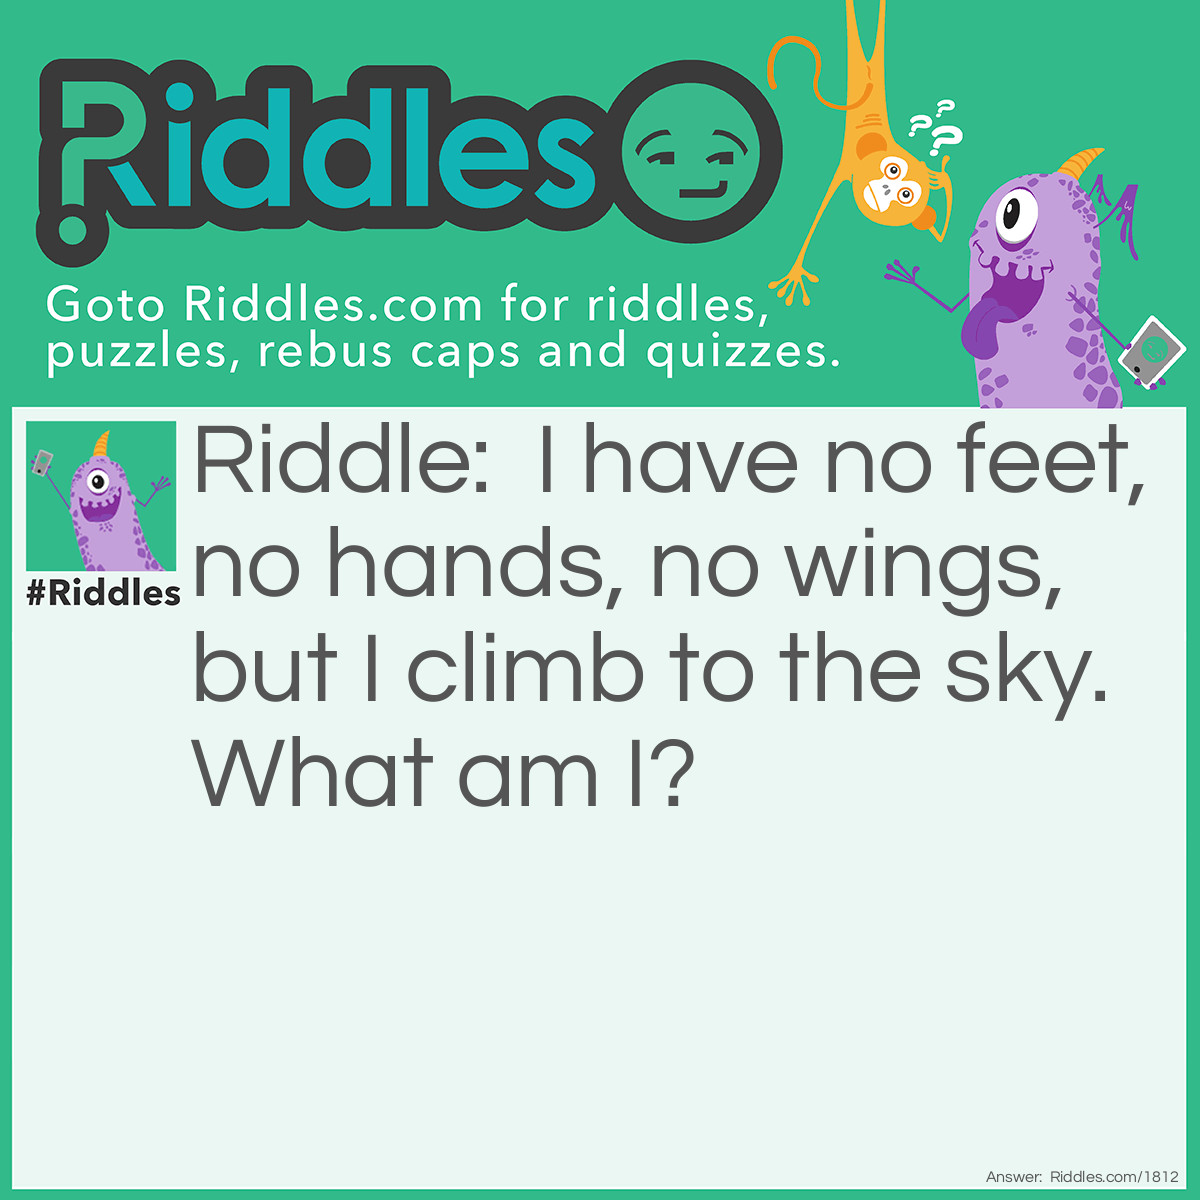 Riddle: I have no feet, no hands, no wings, but I climb to the sky. What am I? Answer: Smoke.